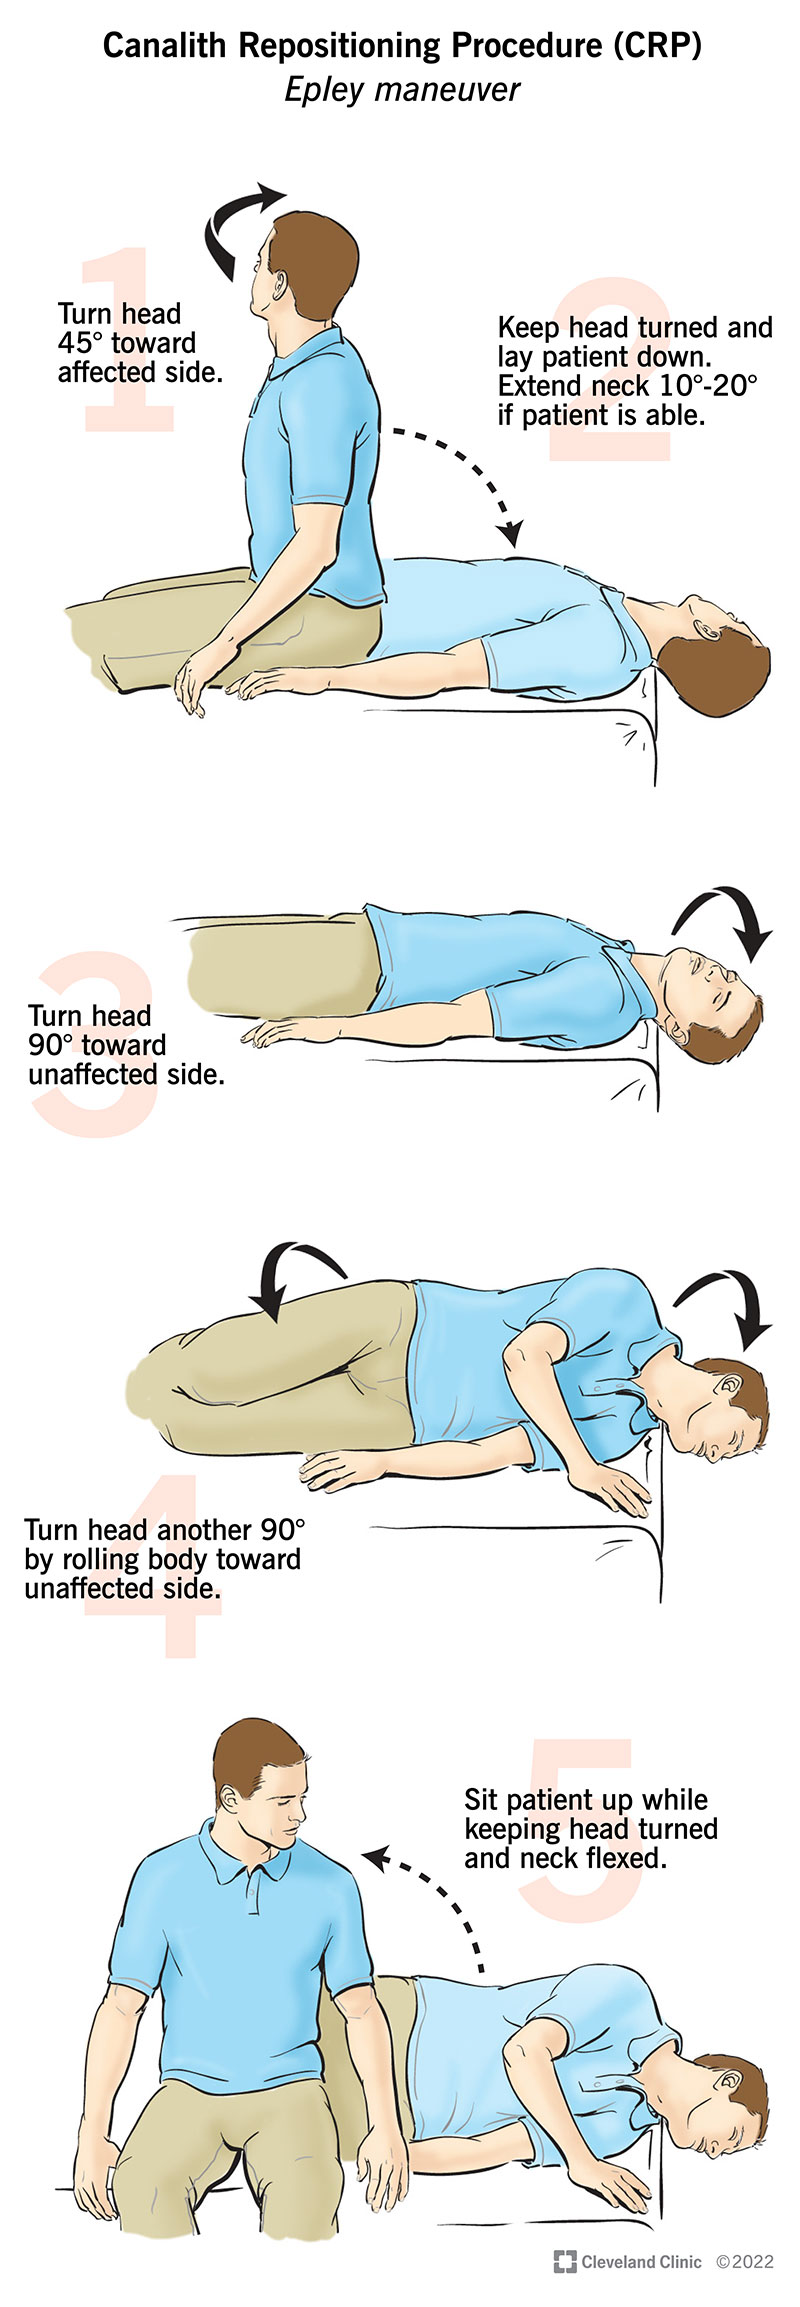 Step-by-step instructions for the Epley maneuver.